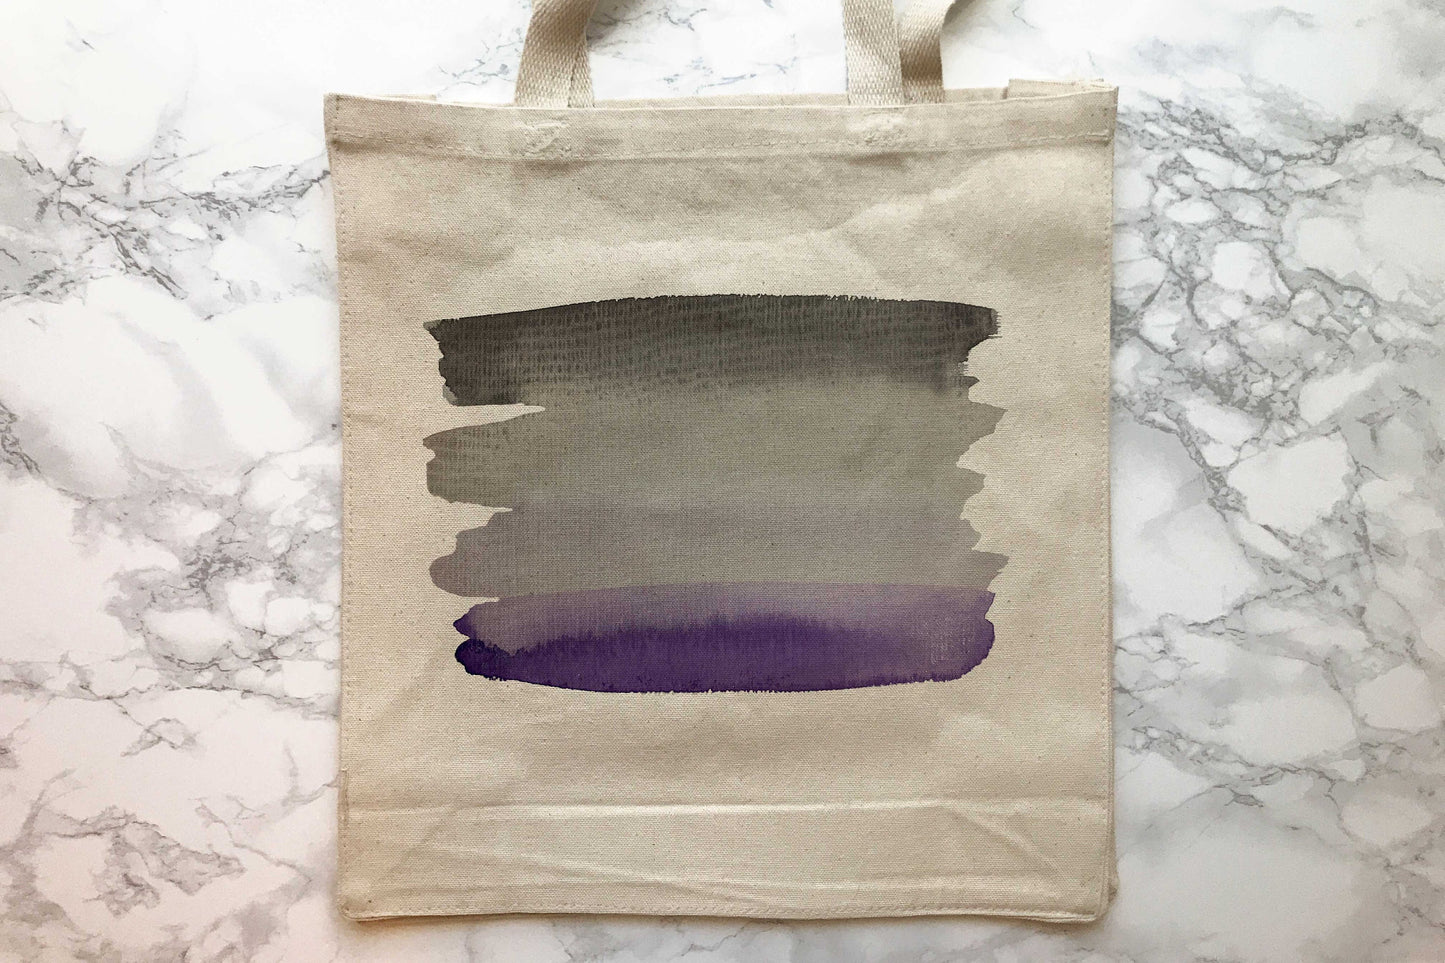 Asexual Tote Bag